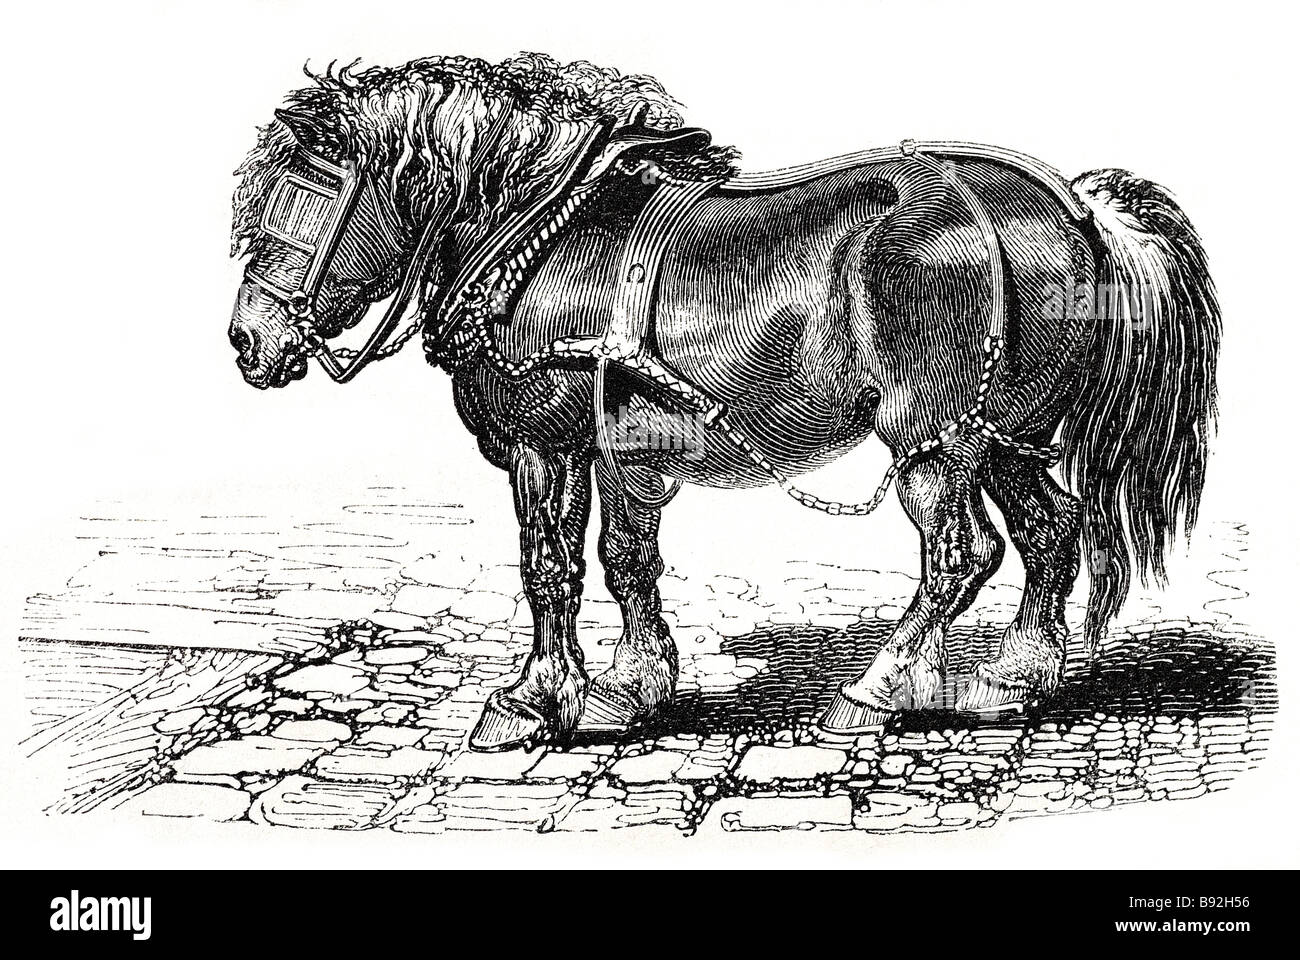 dray horse james ward A draft horse draught horse or dray horse (from the Anglo-Saxon dragan meaning to draw or haul) is a large Stock Photo